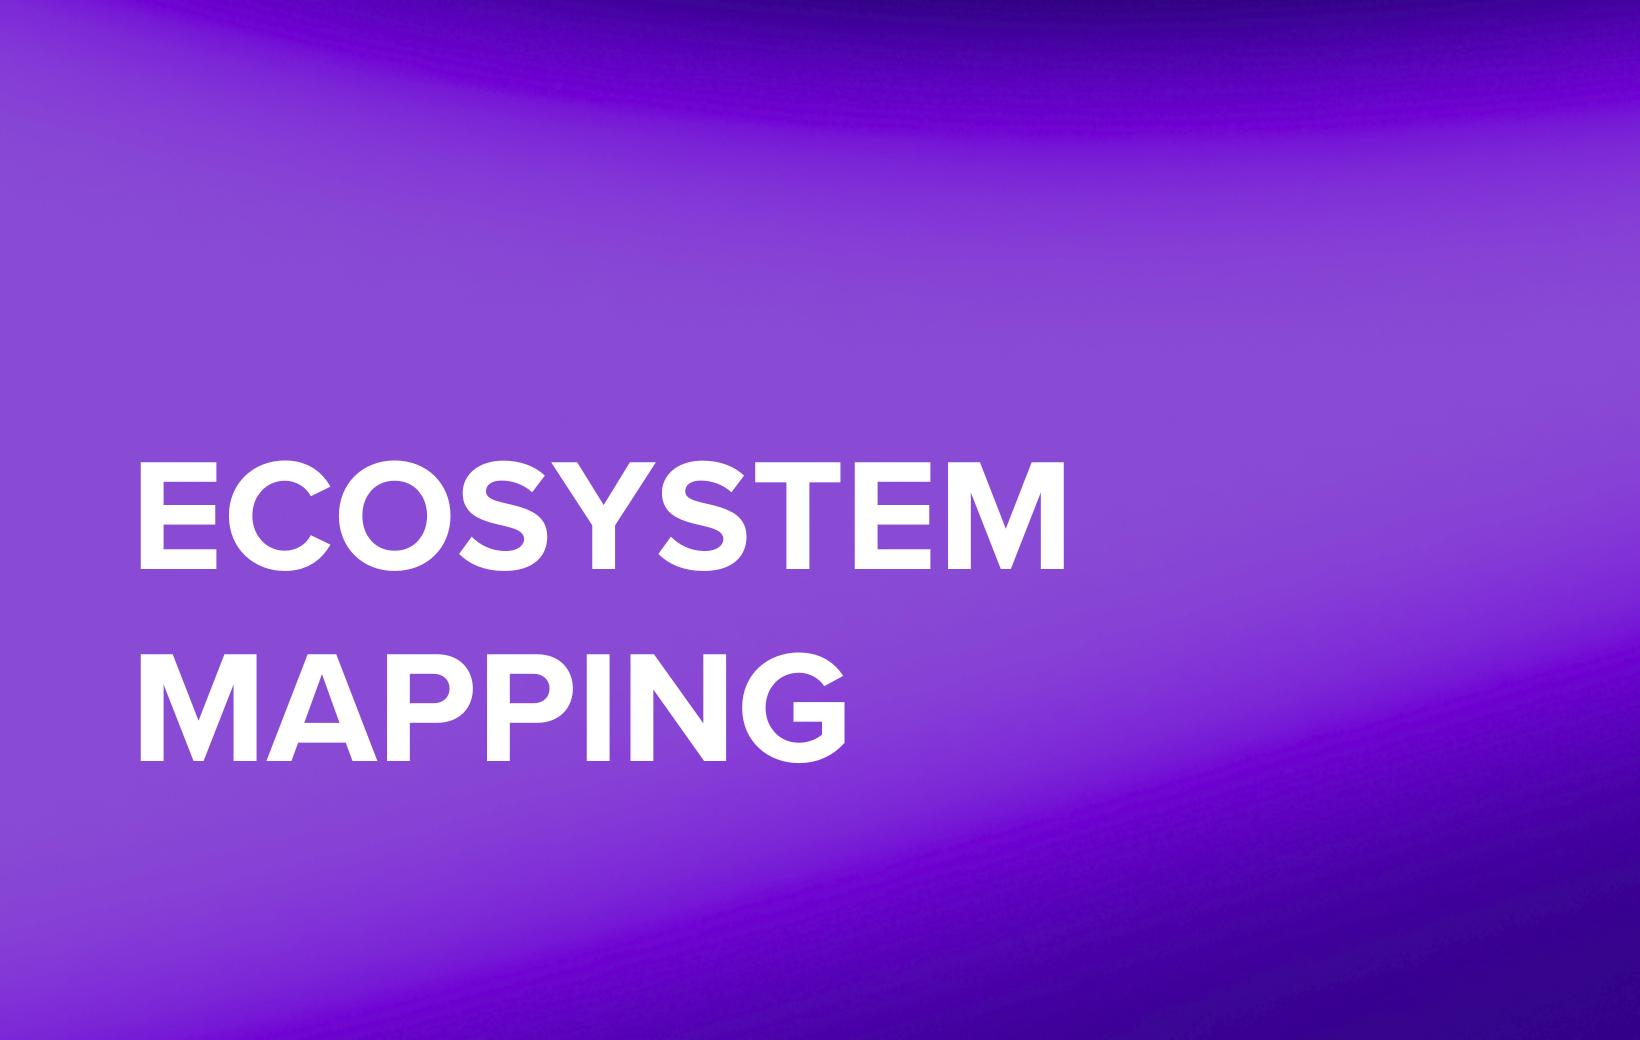 Ecosystem Mapping